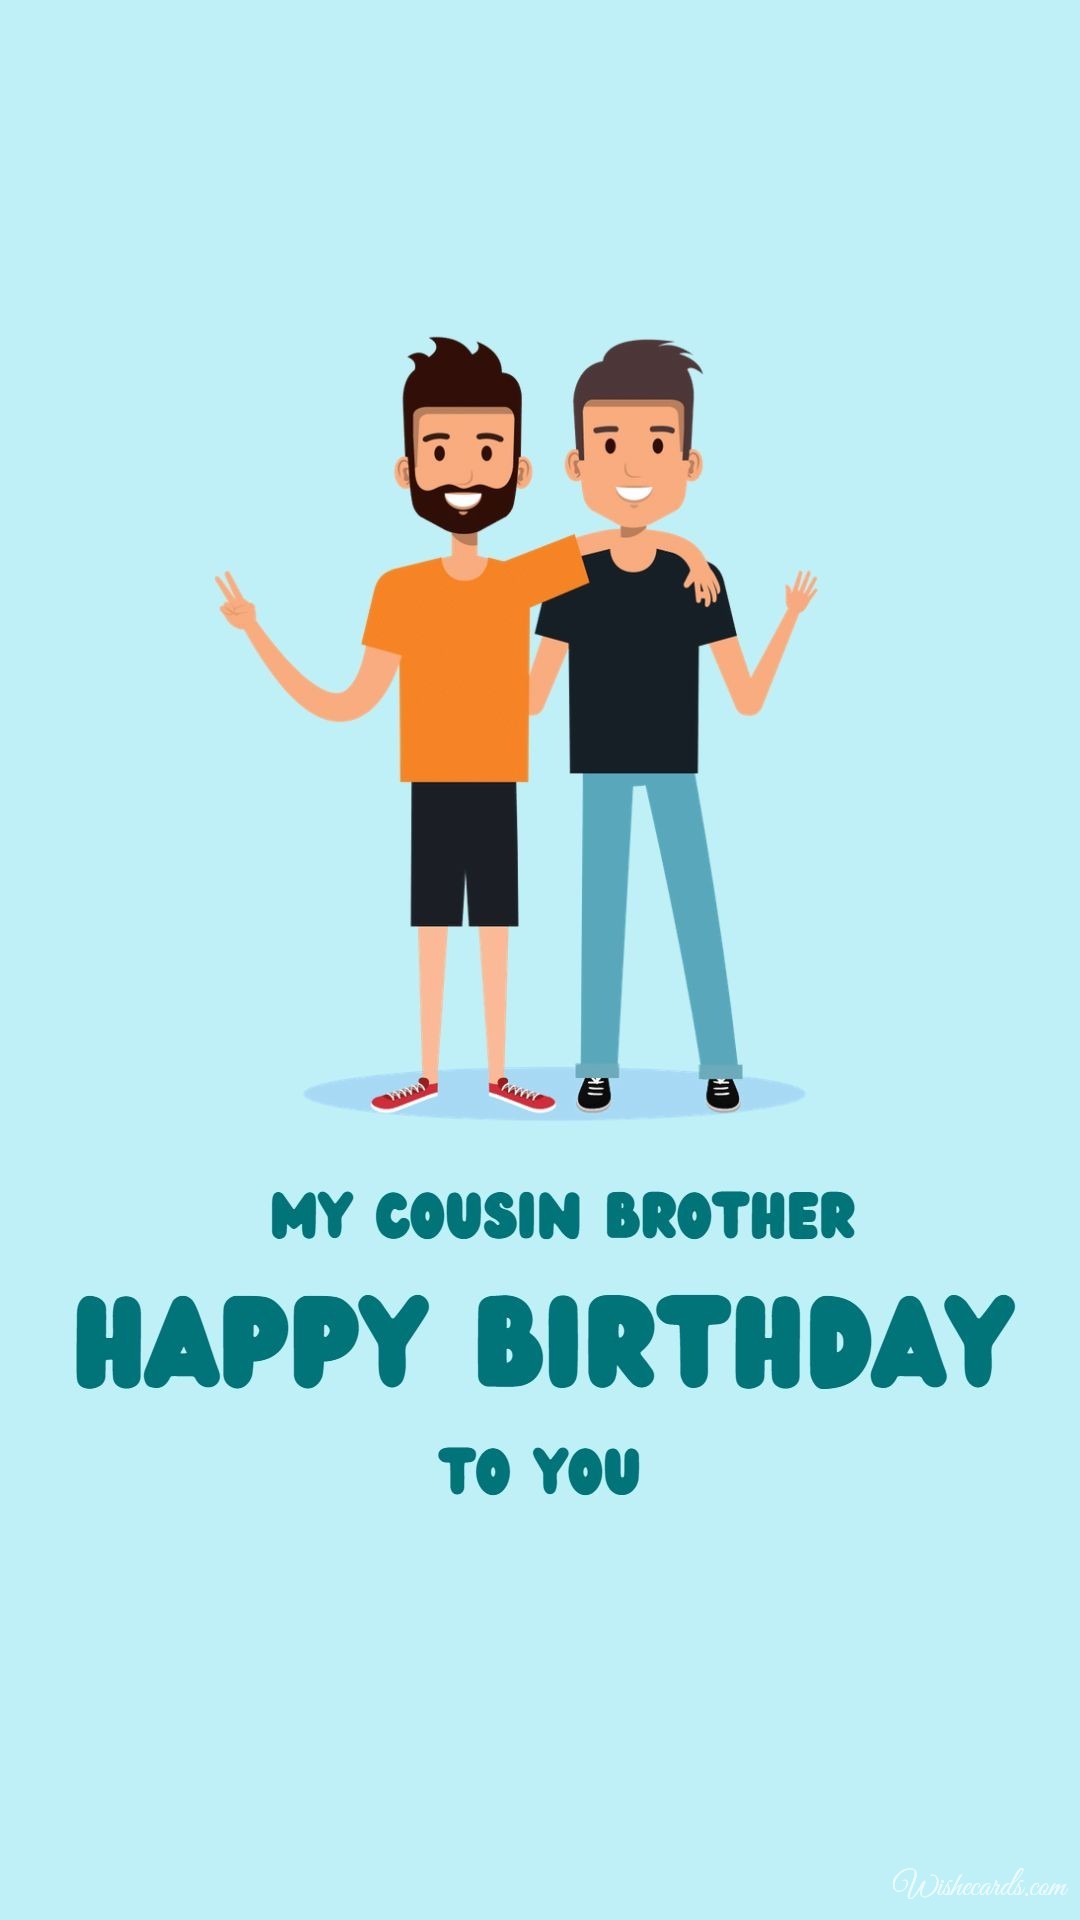 Birthday Image for Cousin Brother